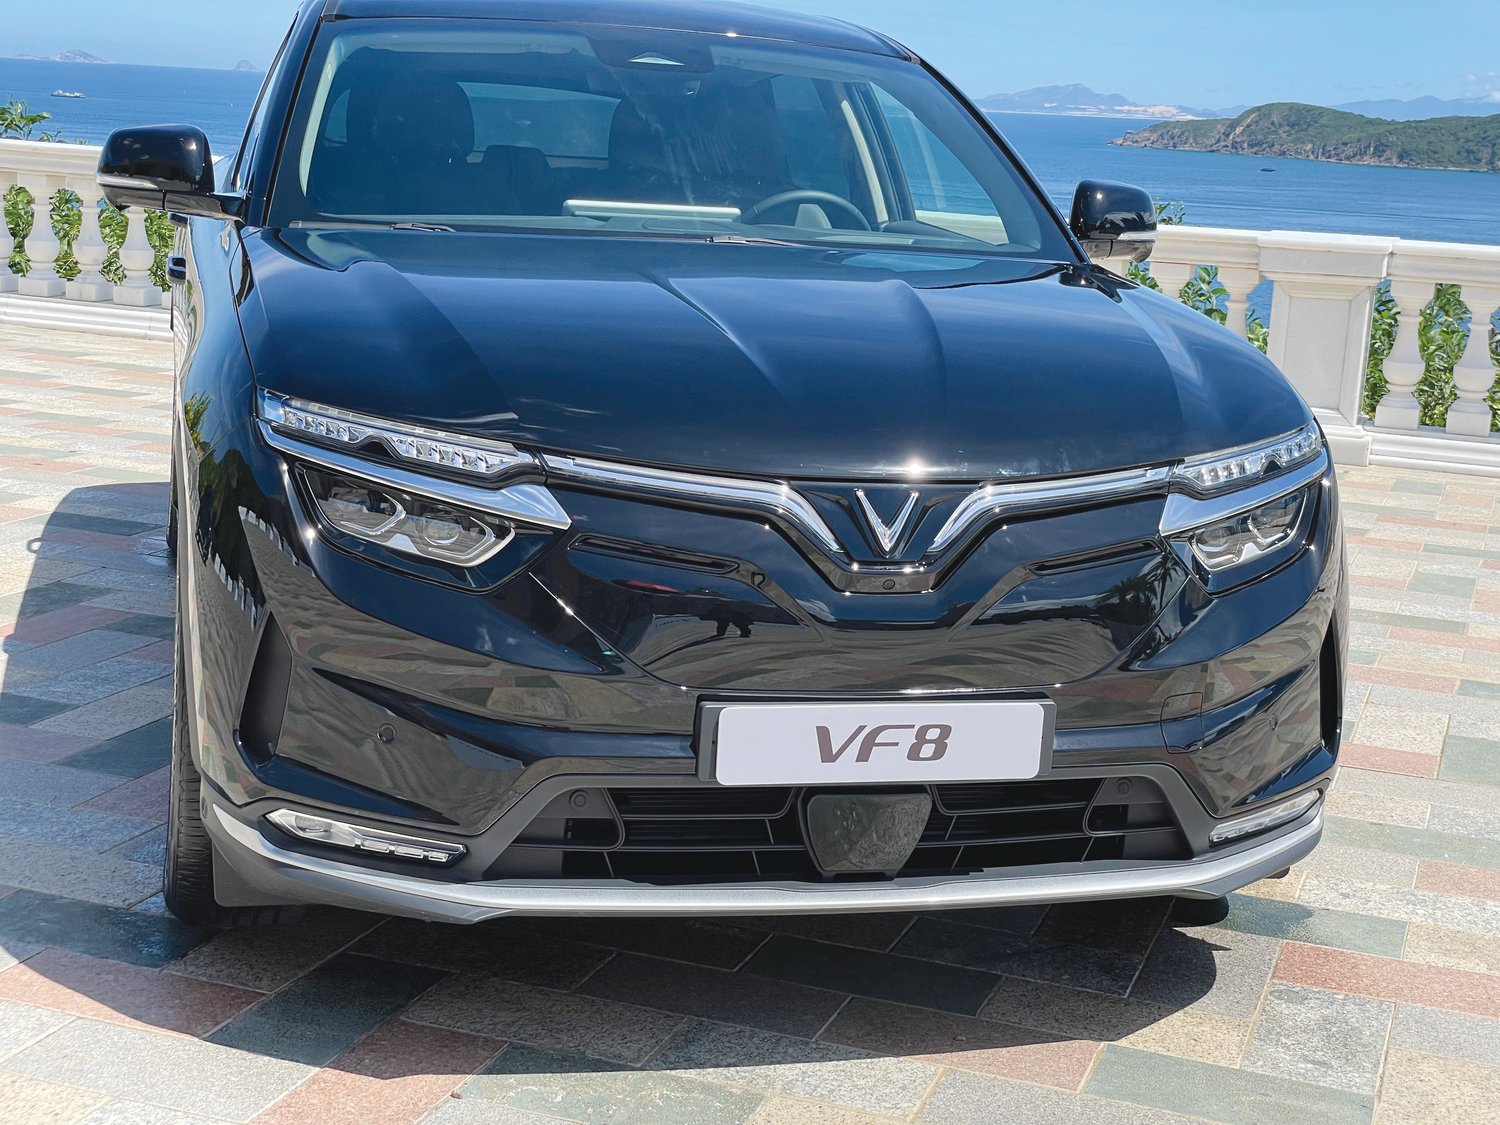 A first look at the VinFast VF-8. The all-electric SUV features a 15.6-inch display and a nearly 350 horsepower engine. Vingroup tour members were some of the first to test drive the vehicles in Nha Trang.